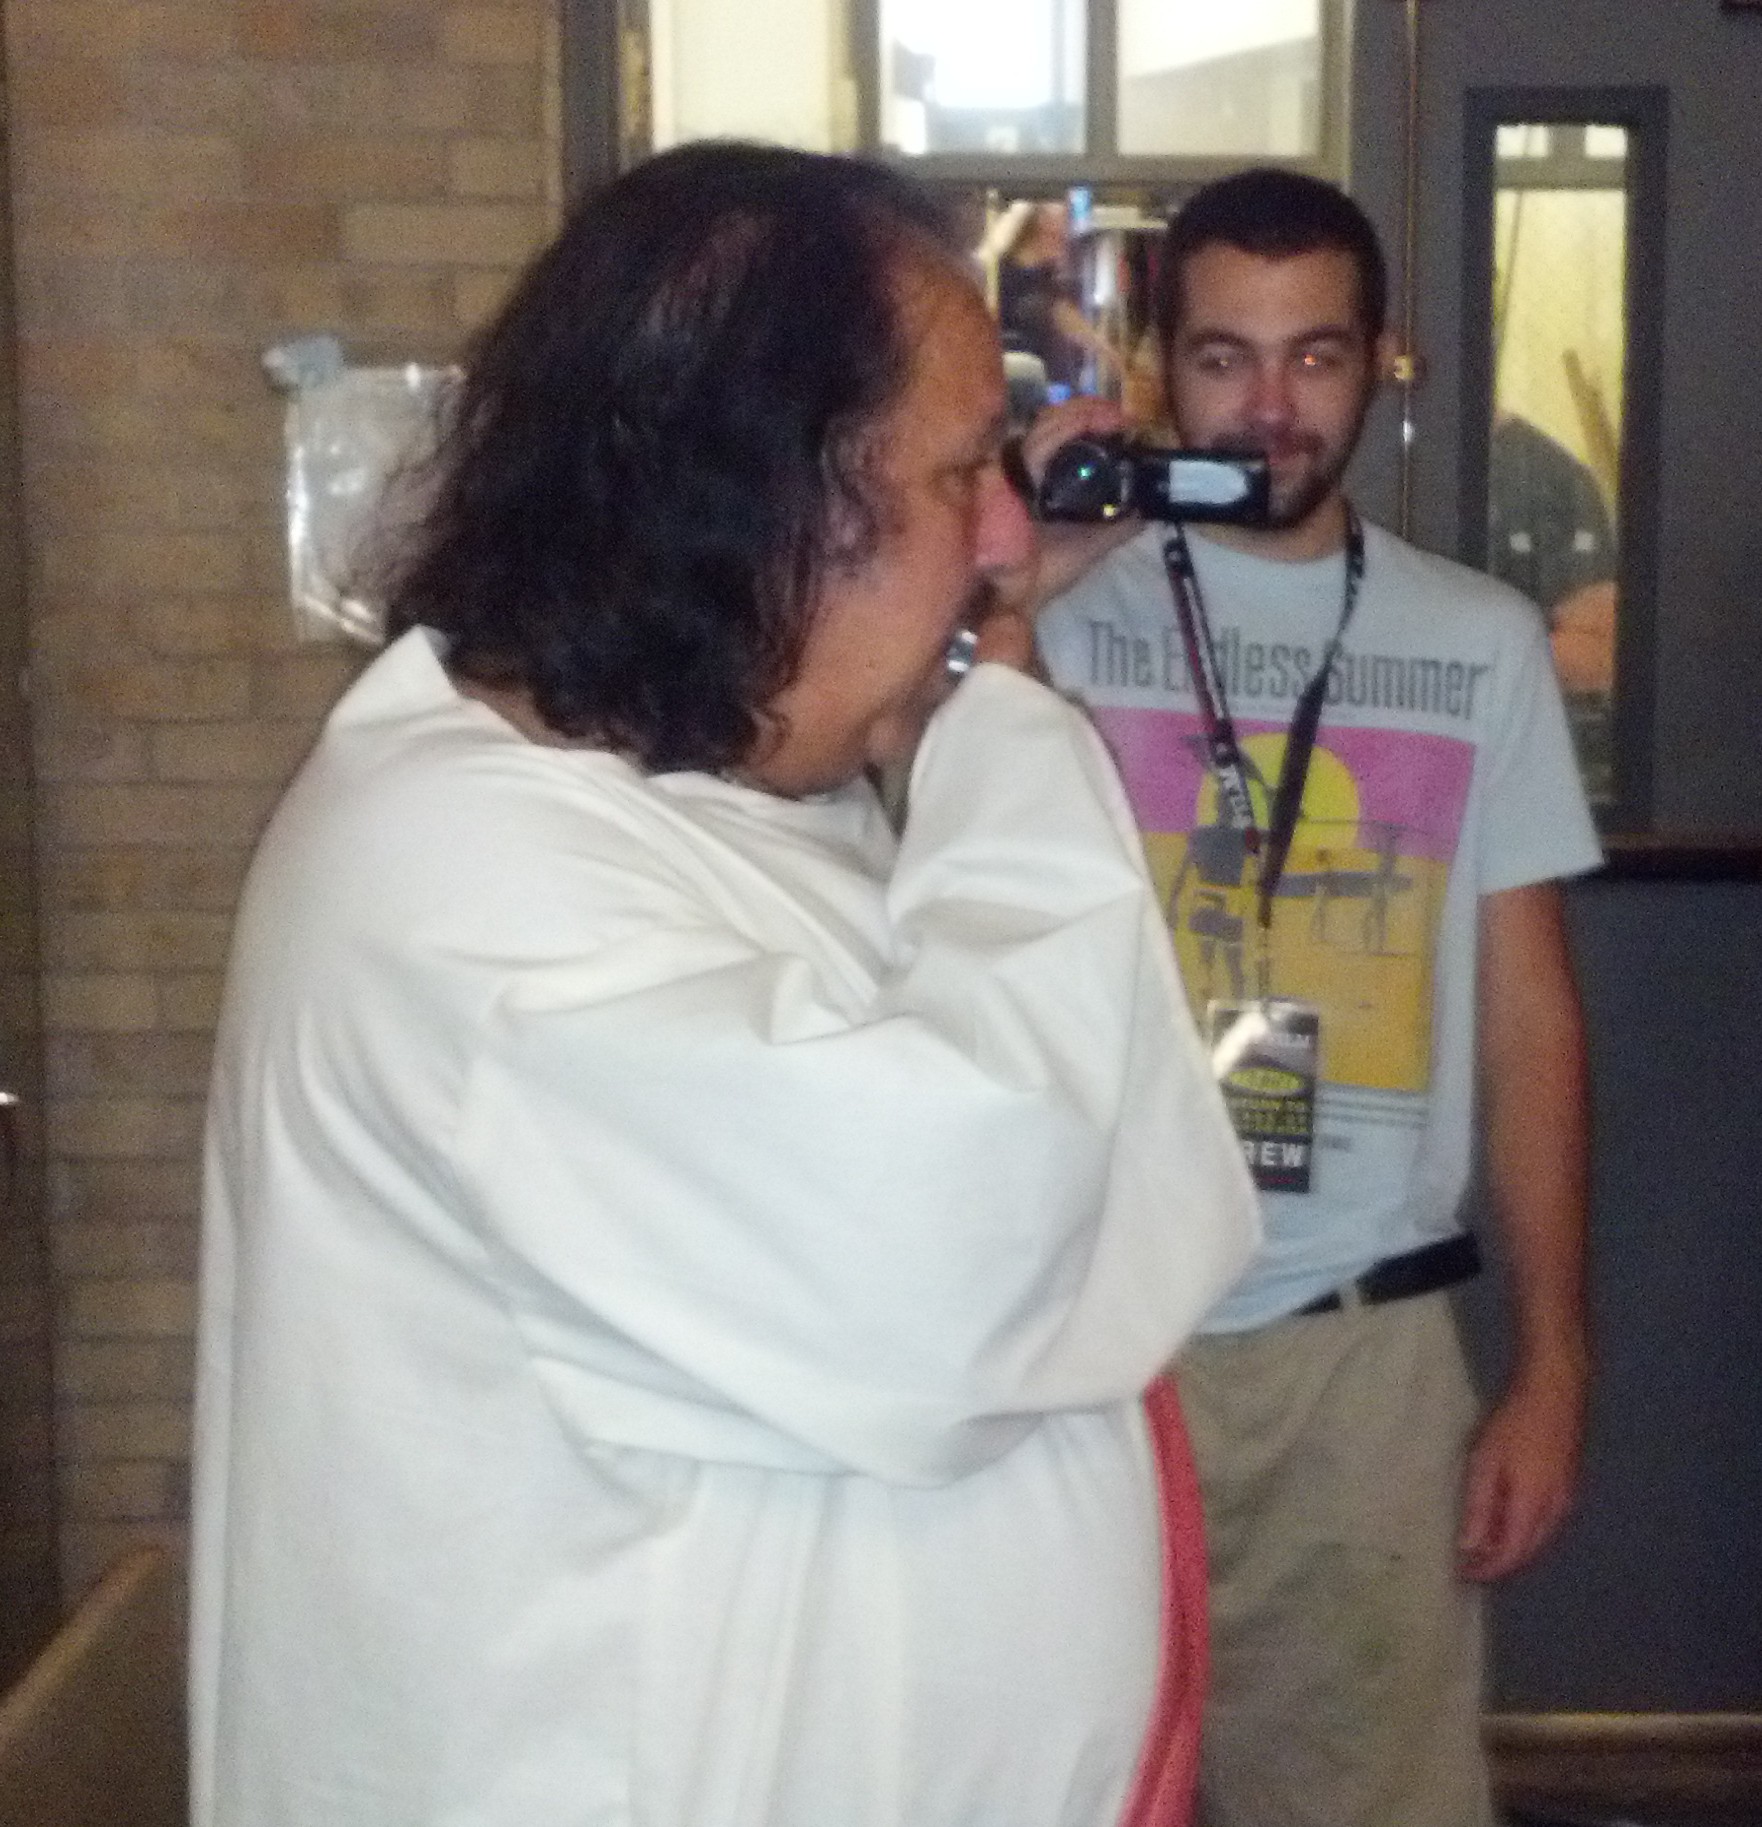 We don't have a lot of pics of us recording at home, so here's Ron Jeremy in a white robe playing the harmonica.